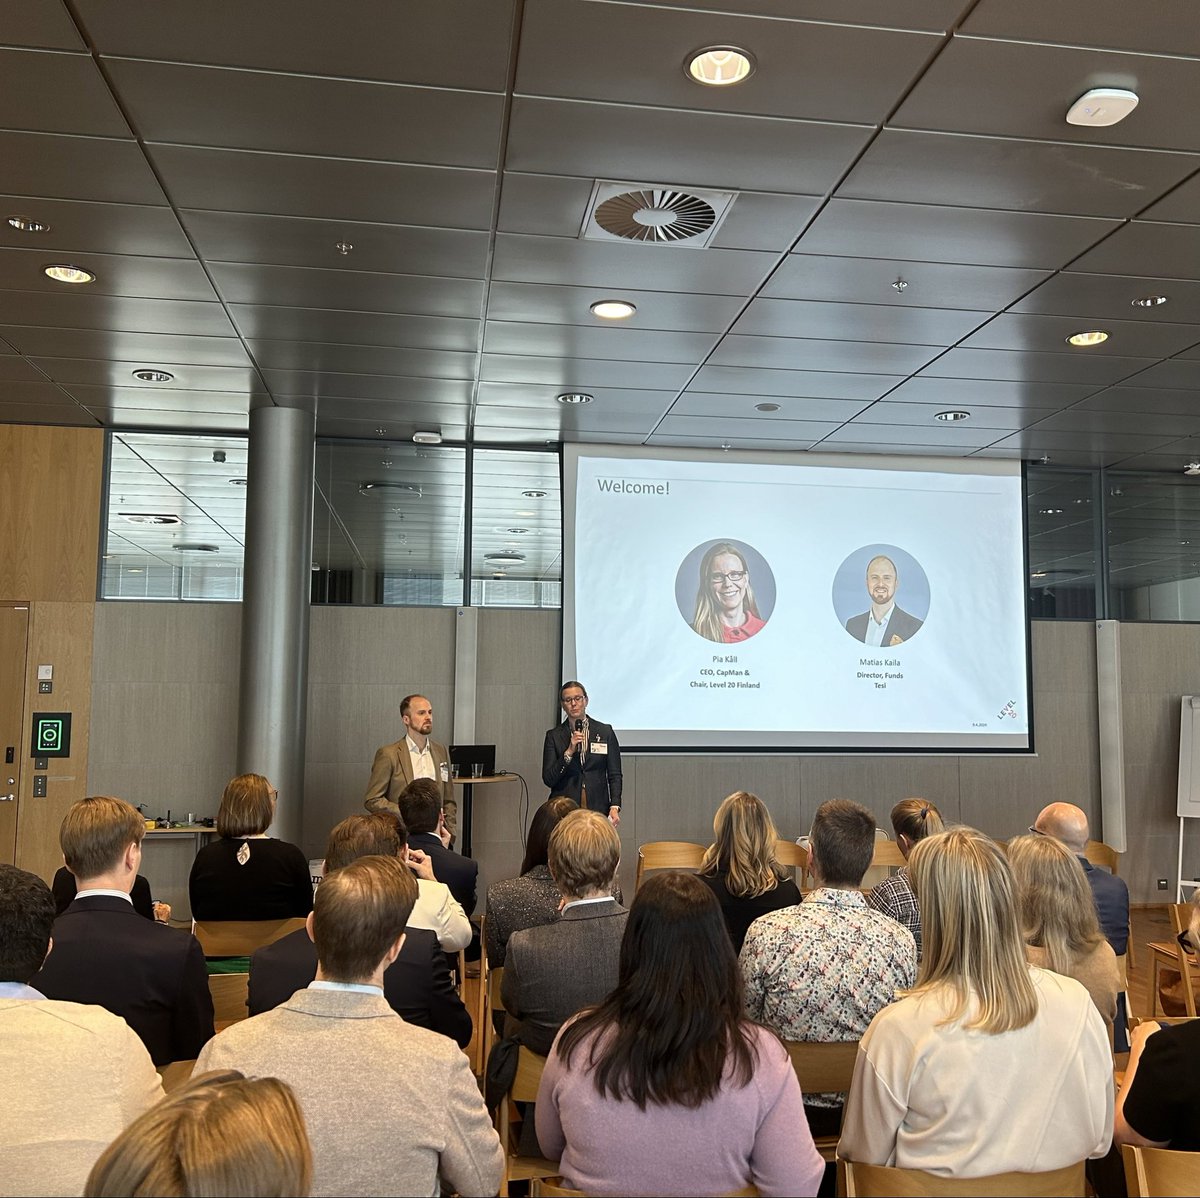 Level 20 Finland’s Launch Event has started 💫 The event is dedicated to paving the way for diversity and inclusion in the Finnish PE & VC industry! We are happy to see a room full of Finnish GPs and LPs. On the stage @pia_kall and @LMatiasKaila are opening the afternoon 👏🏻